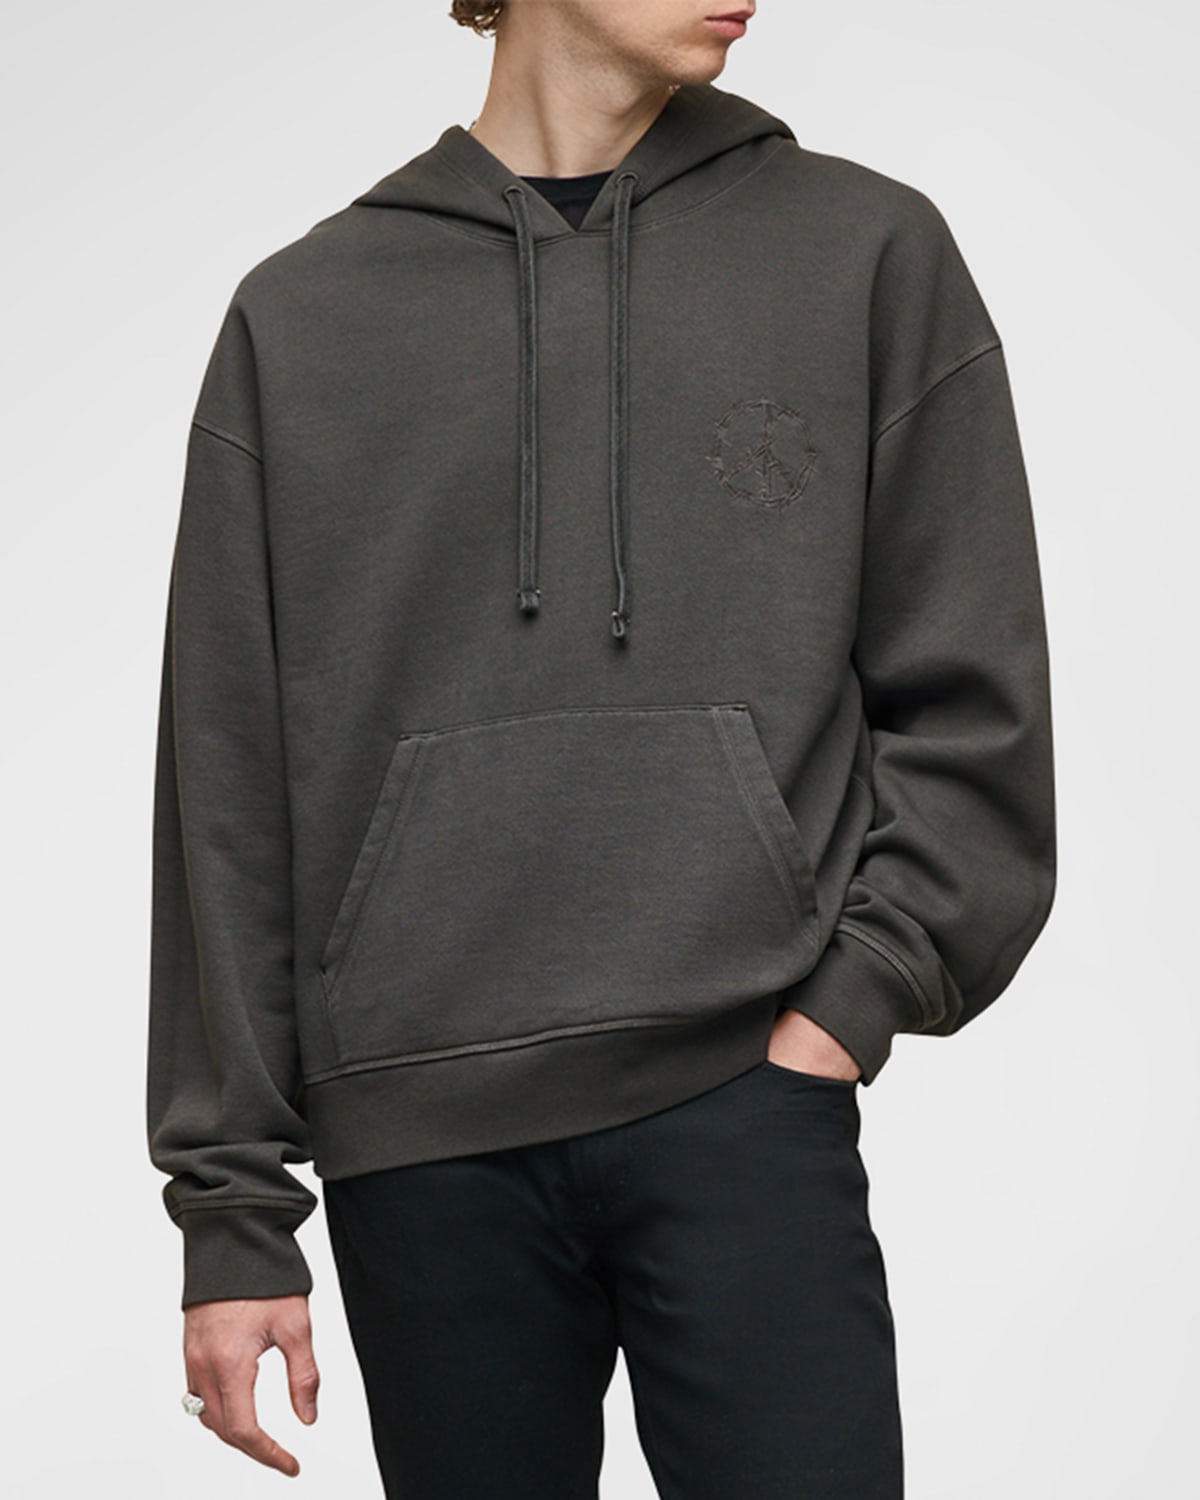 Men's Embroidered Peace Hoodie